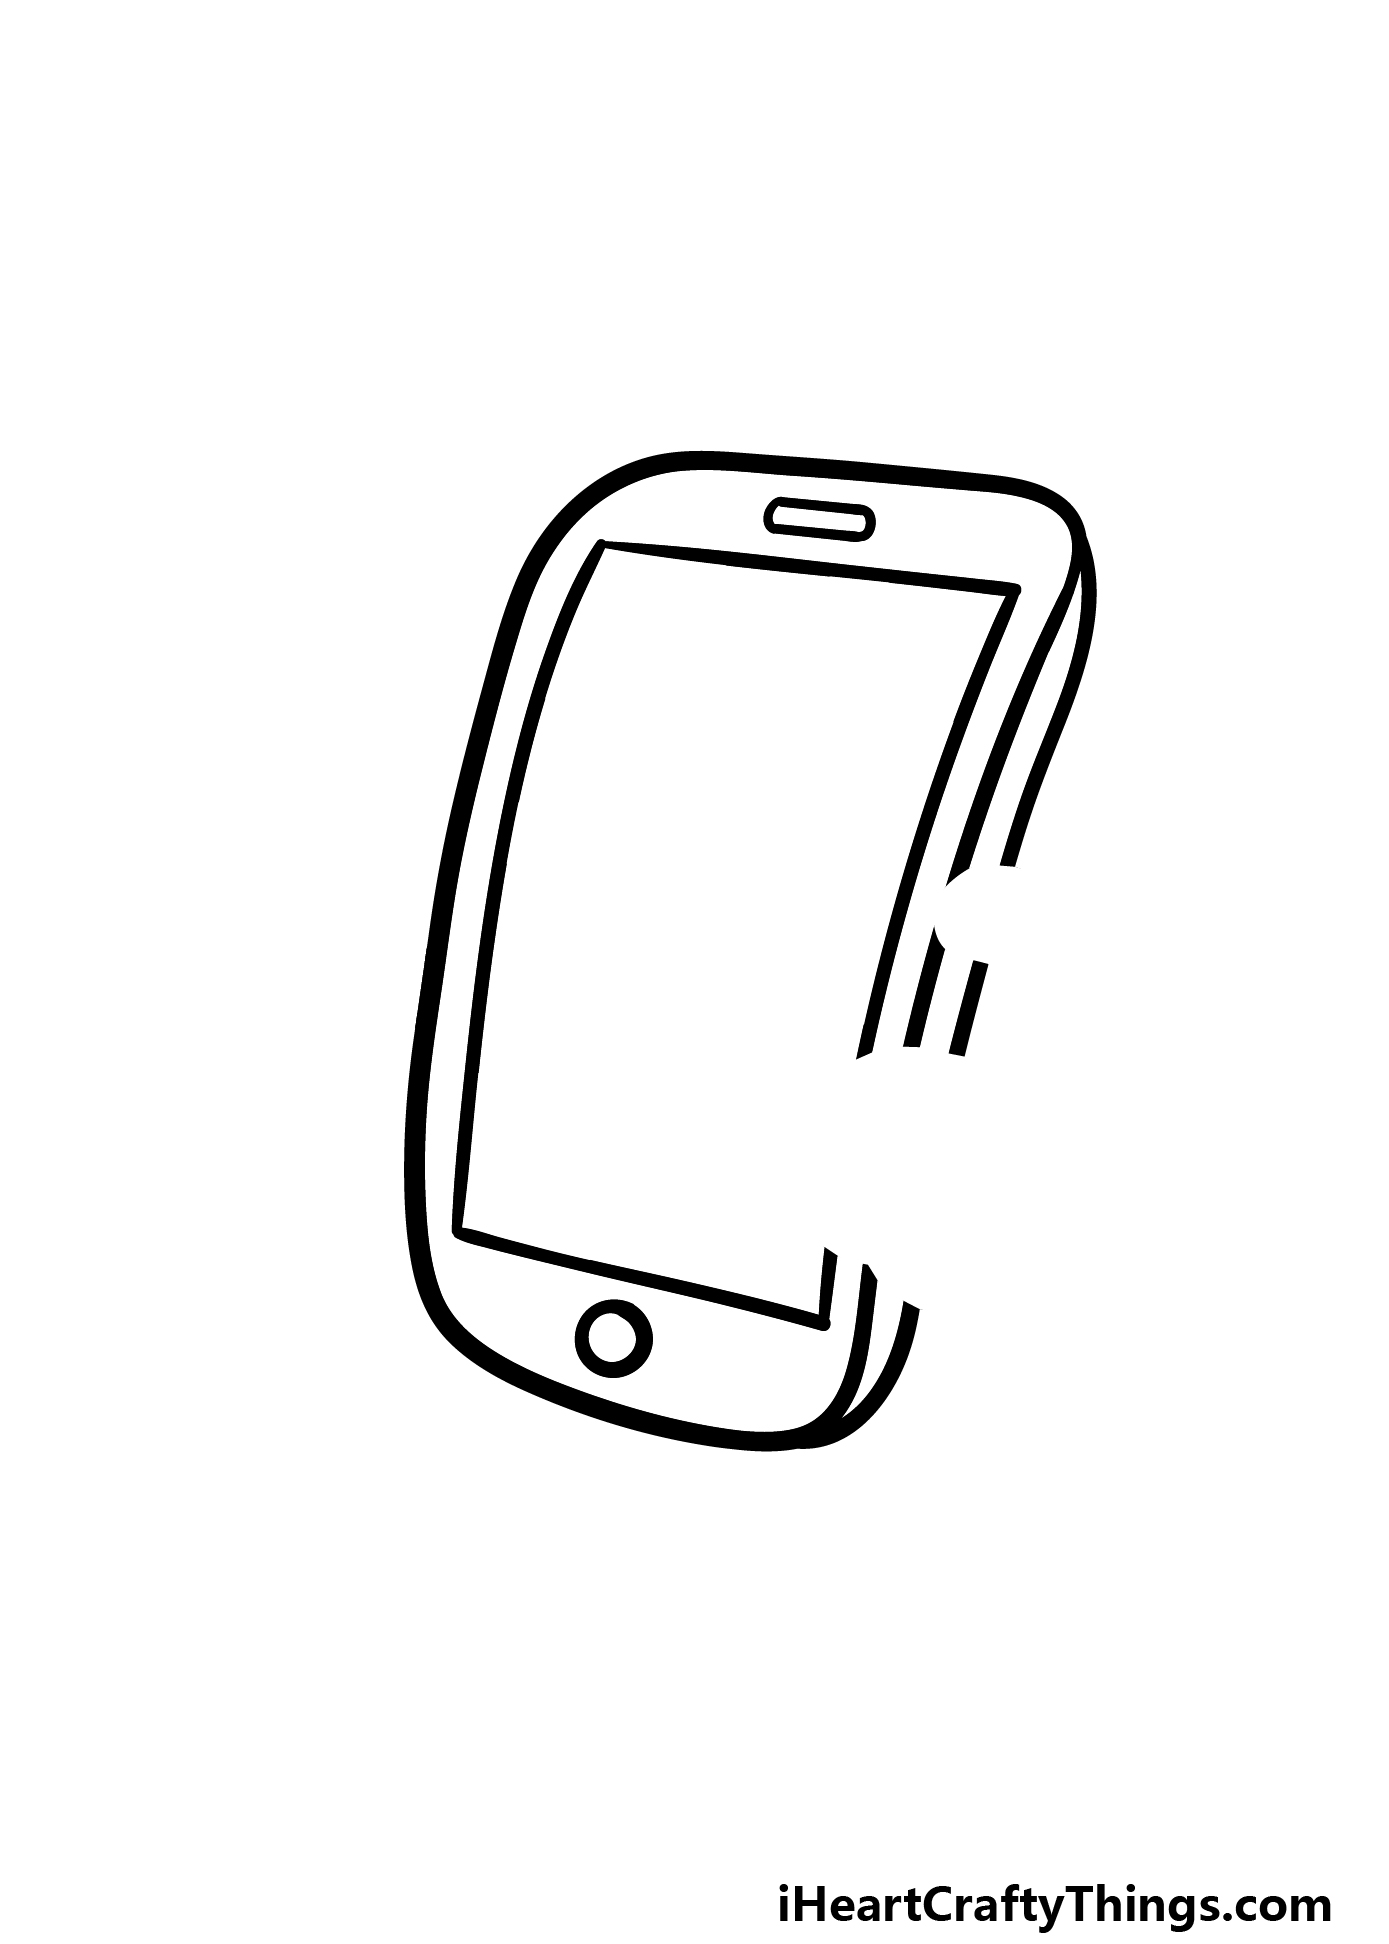 Cellphone Sketch Vector Images (over 2,300)